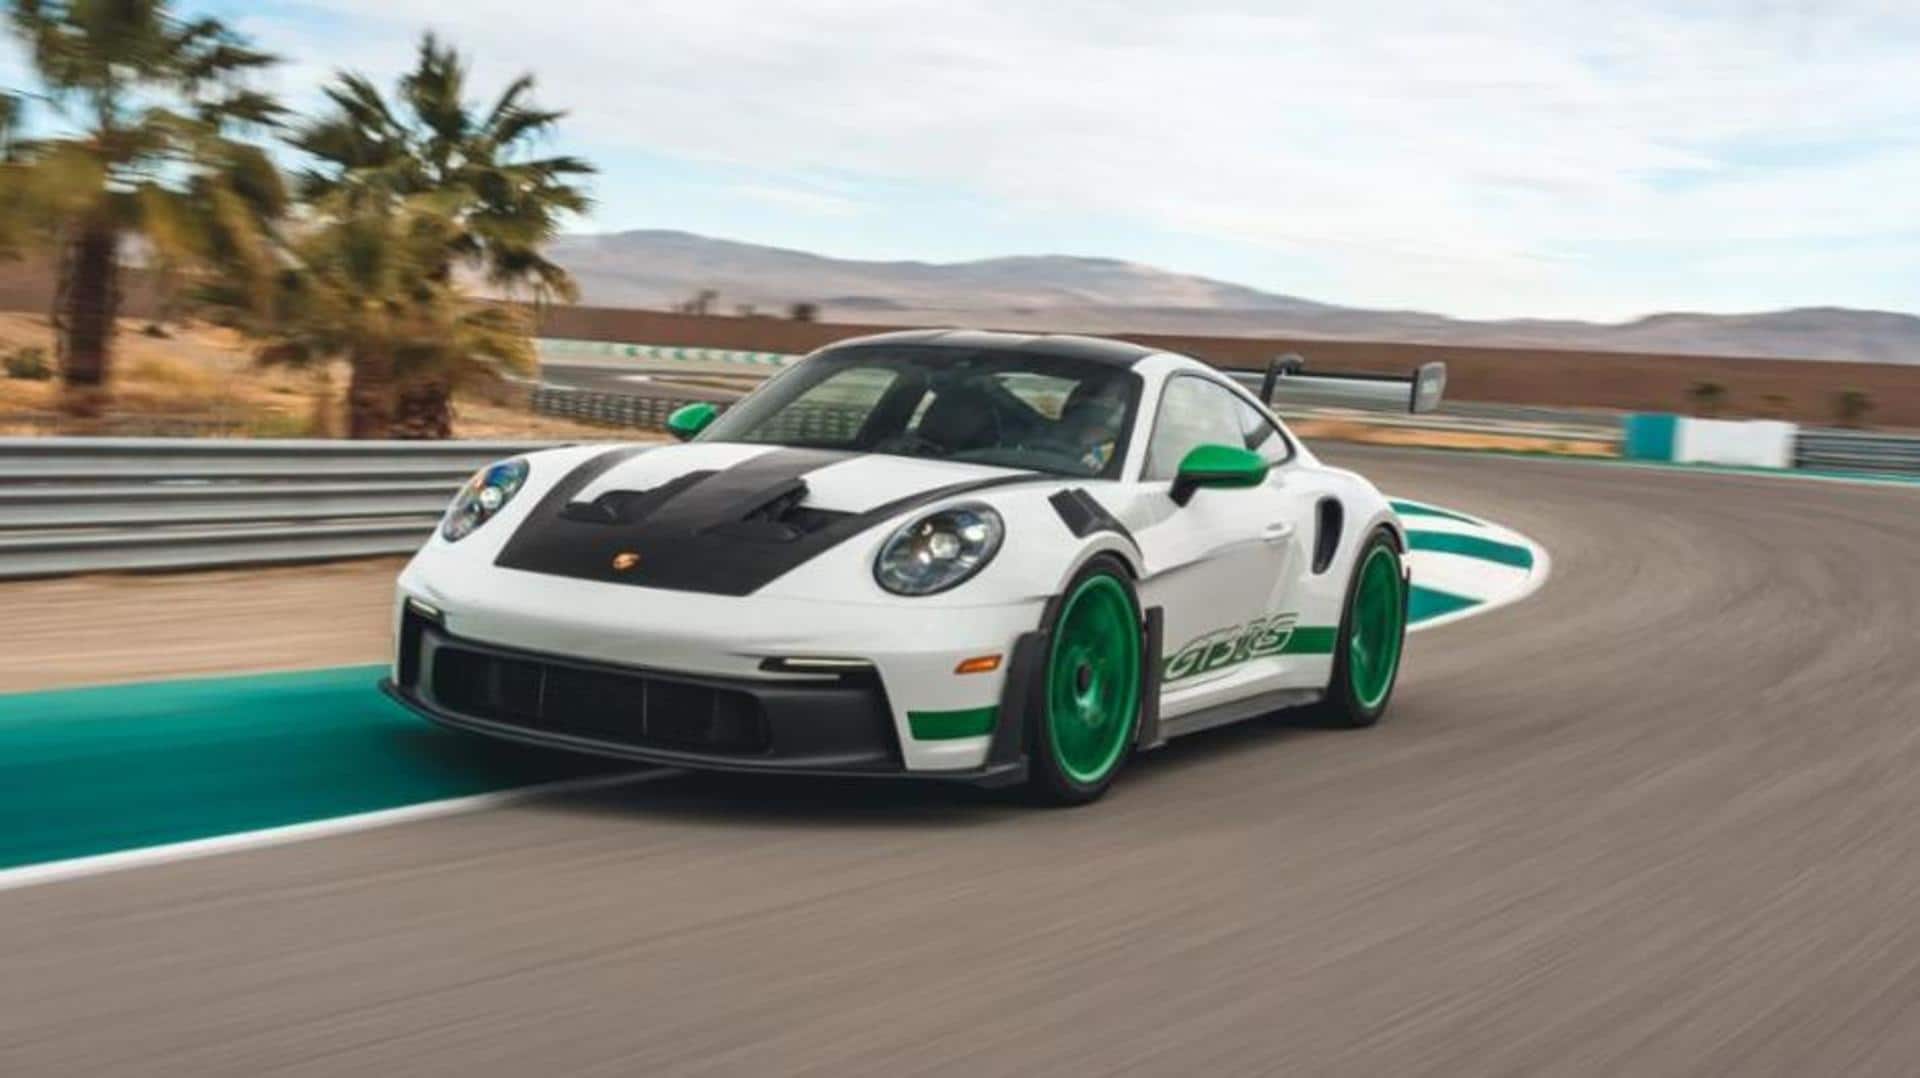 Porsche's limited-run 911 GT3 RS pays homage to Carrera RS